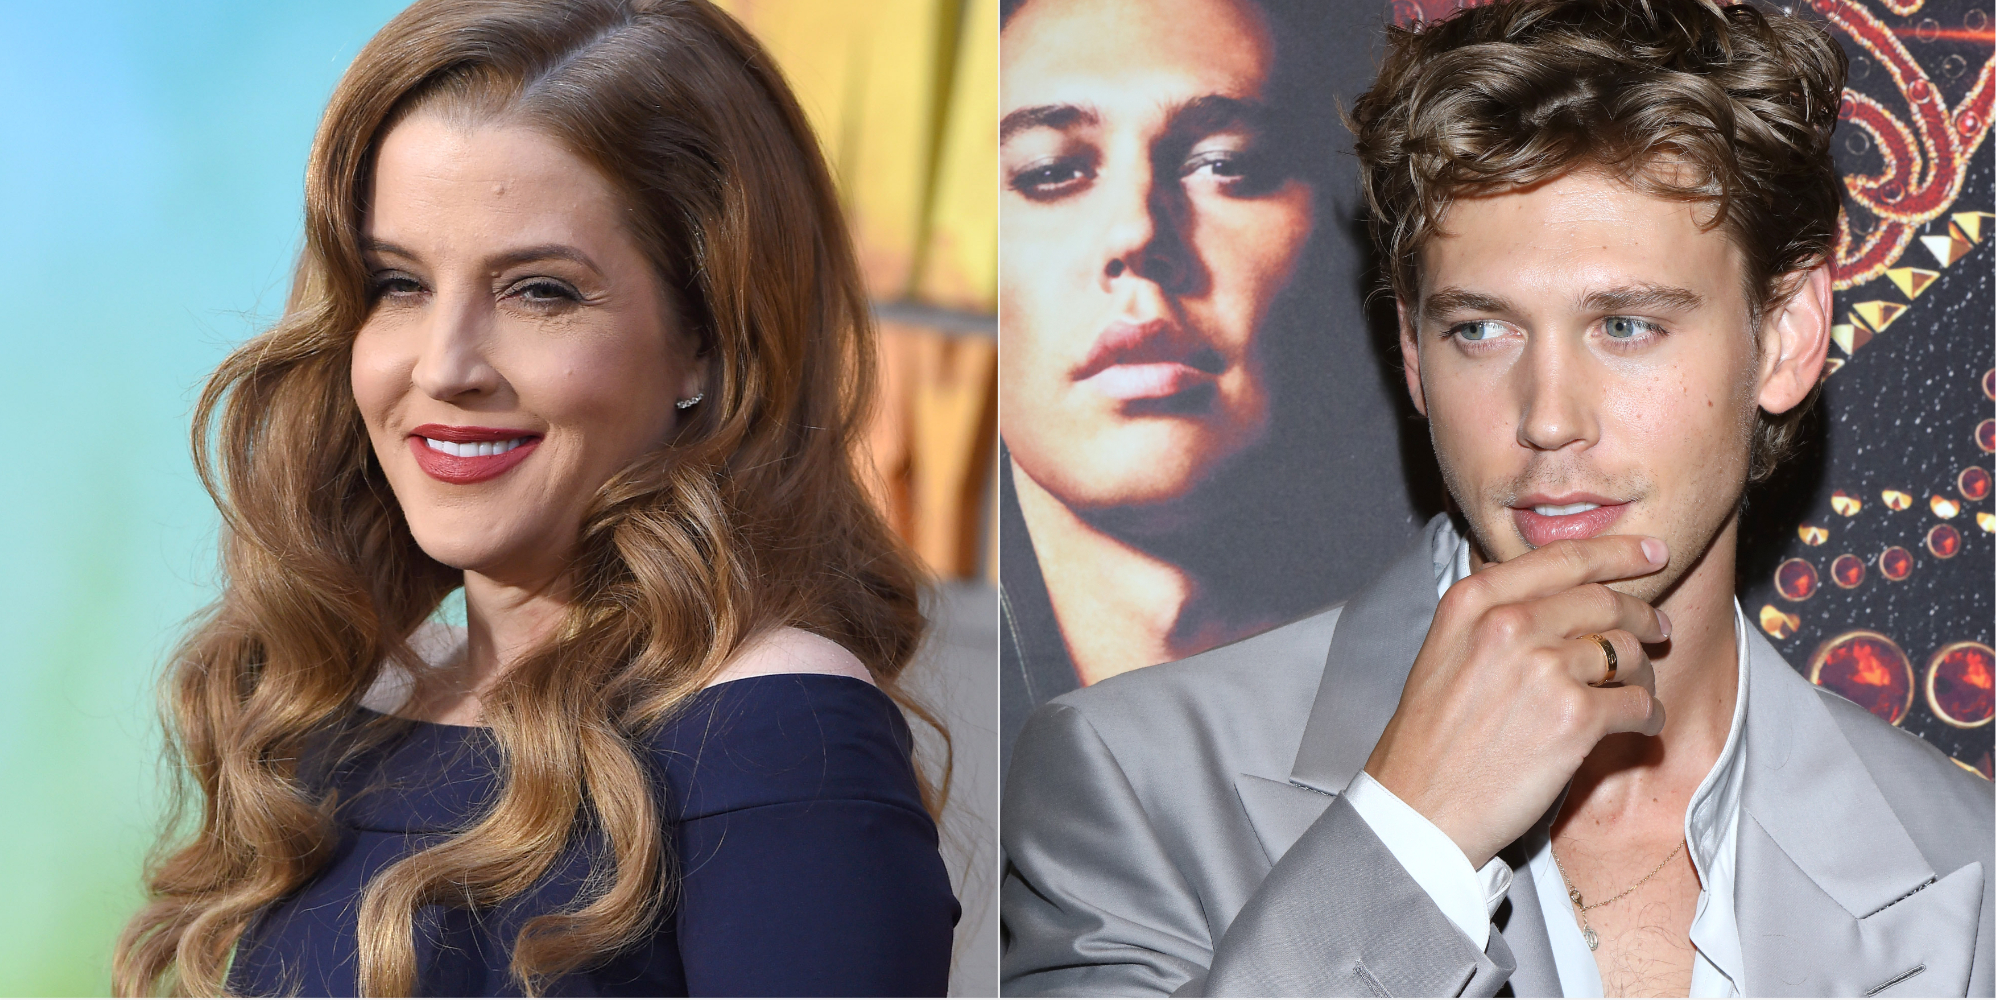 Lisa Marie Presley and 'Elvis' star Austin Butler in a set of side-by-side photographs.